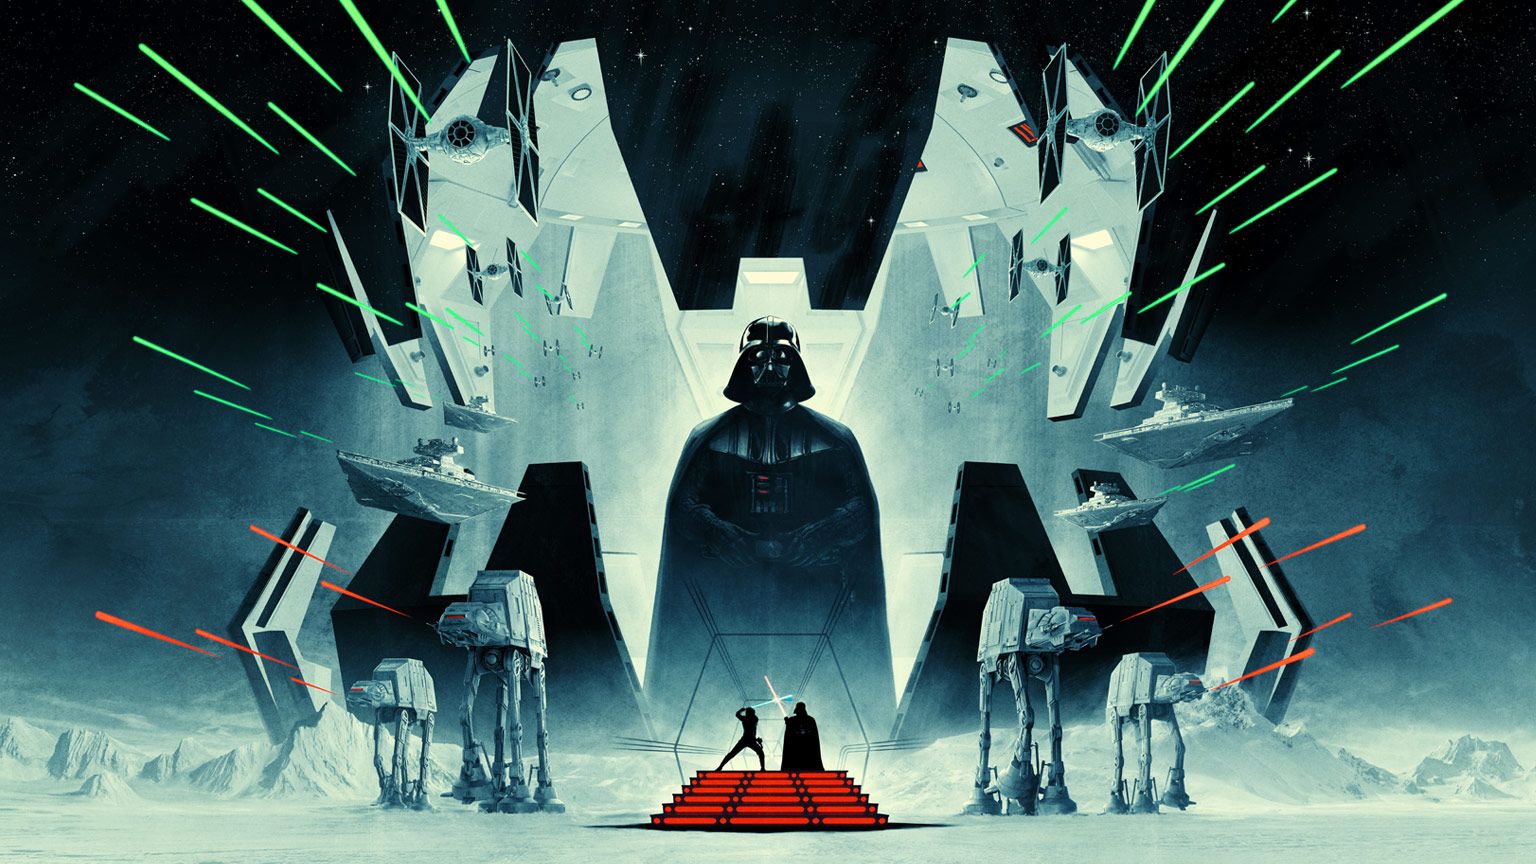 Empire at 40. Matt Ferguson Discusses the Making of His Incredible Star Wars: The Empire Strikes Back Poster